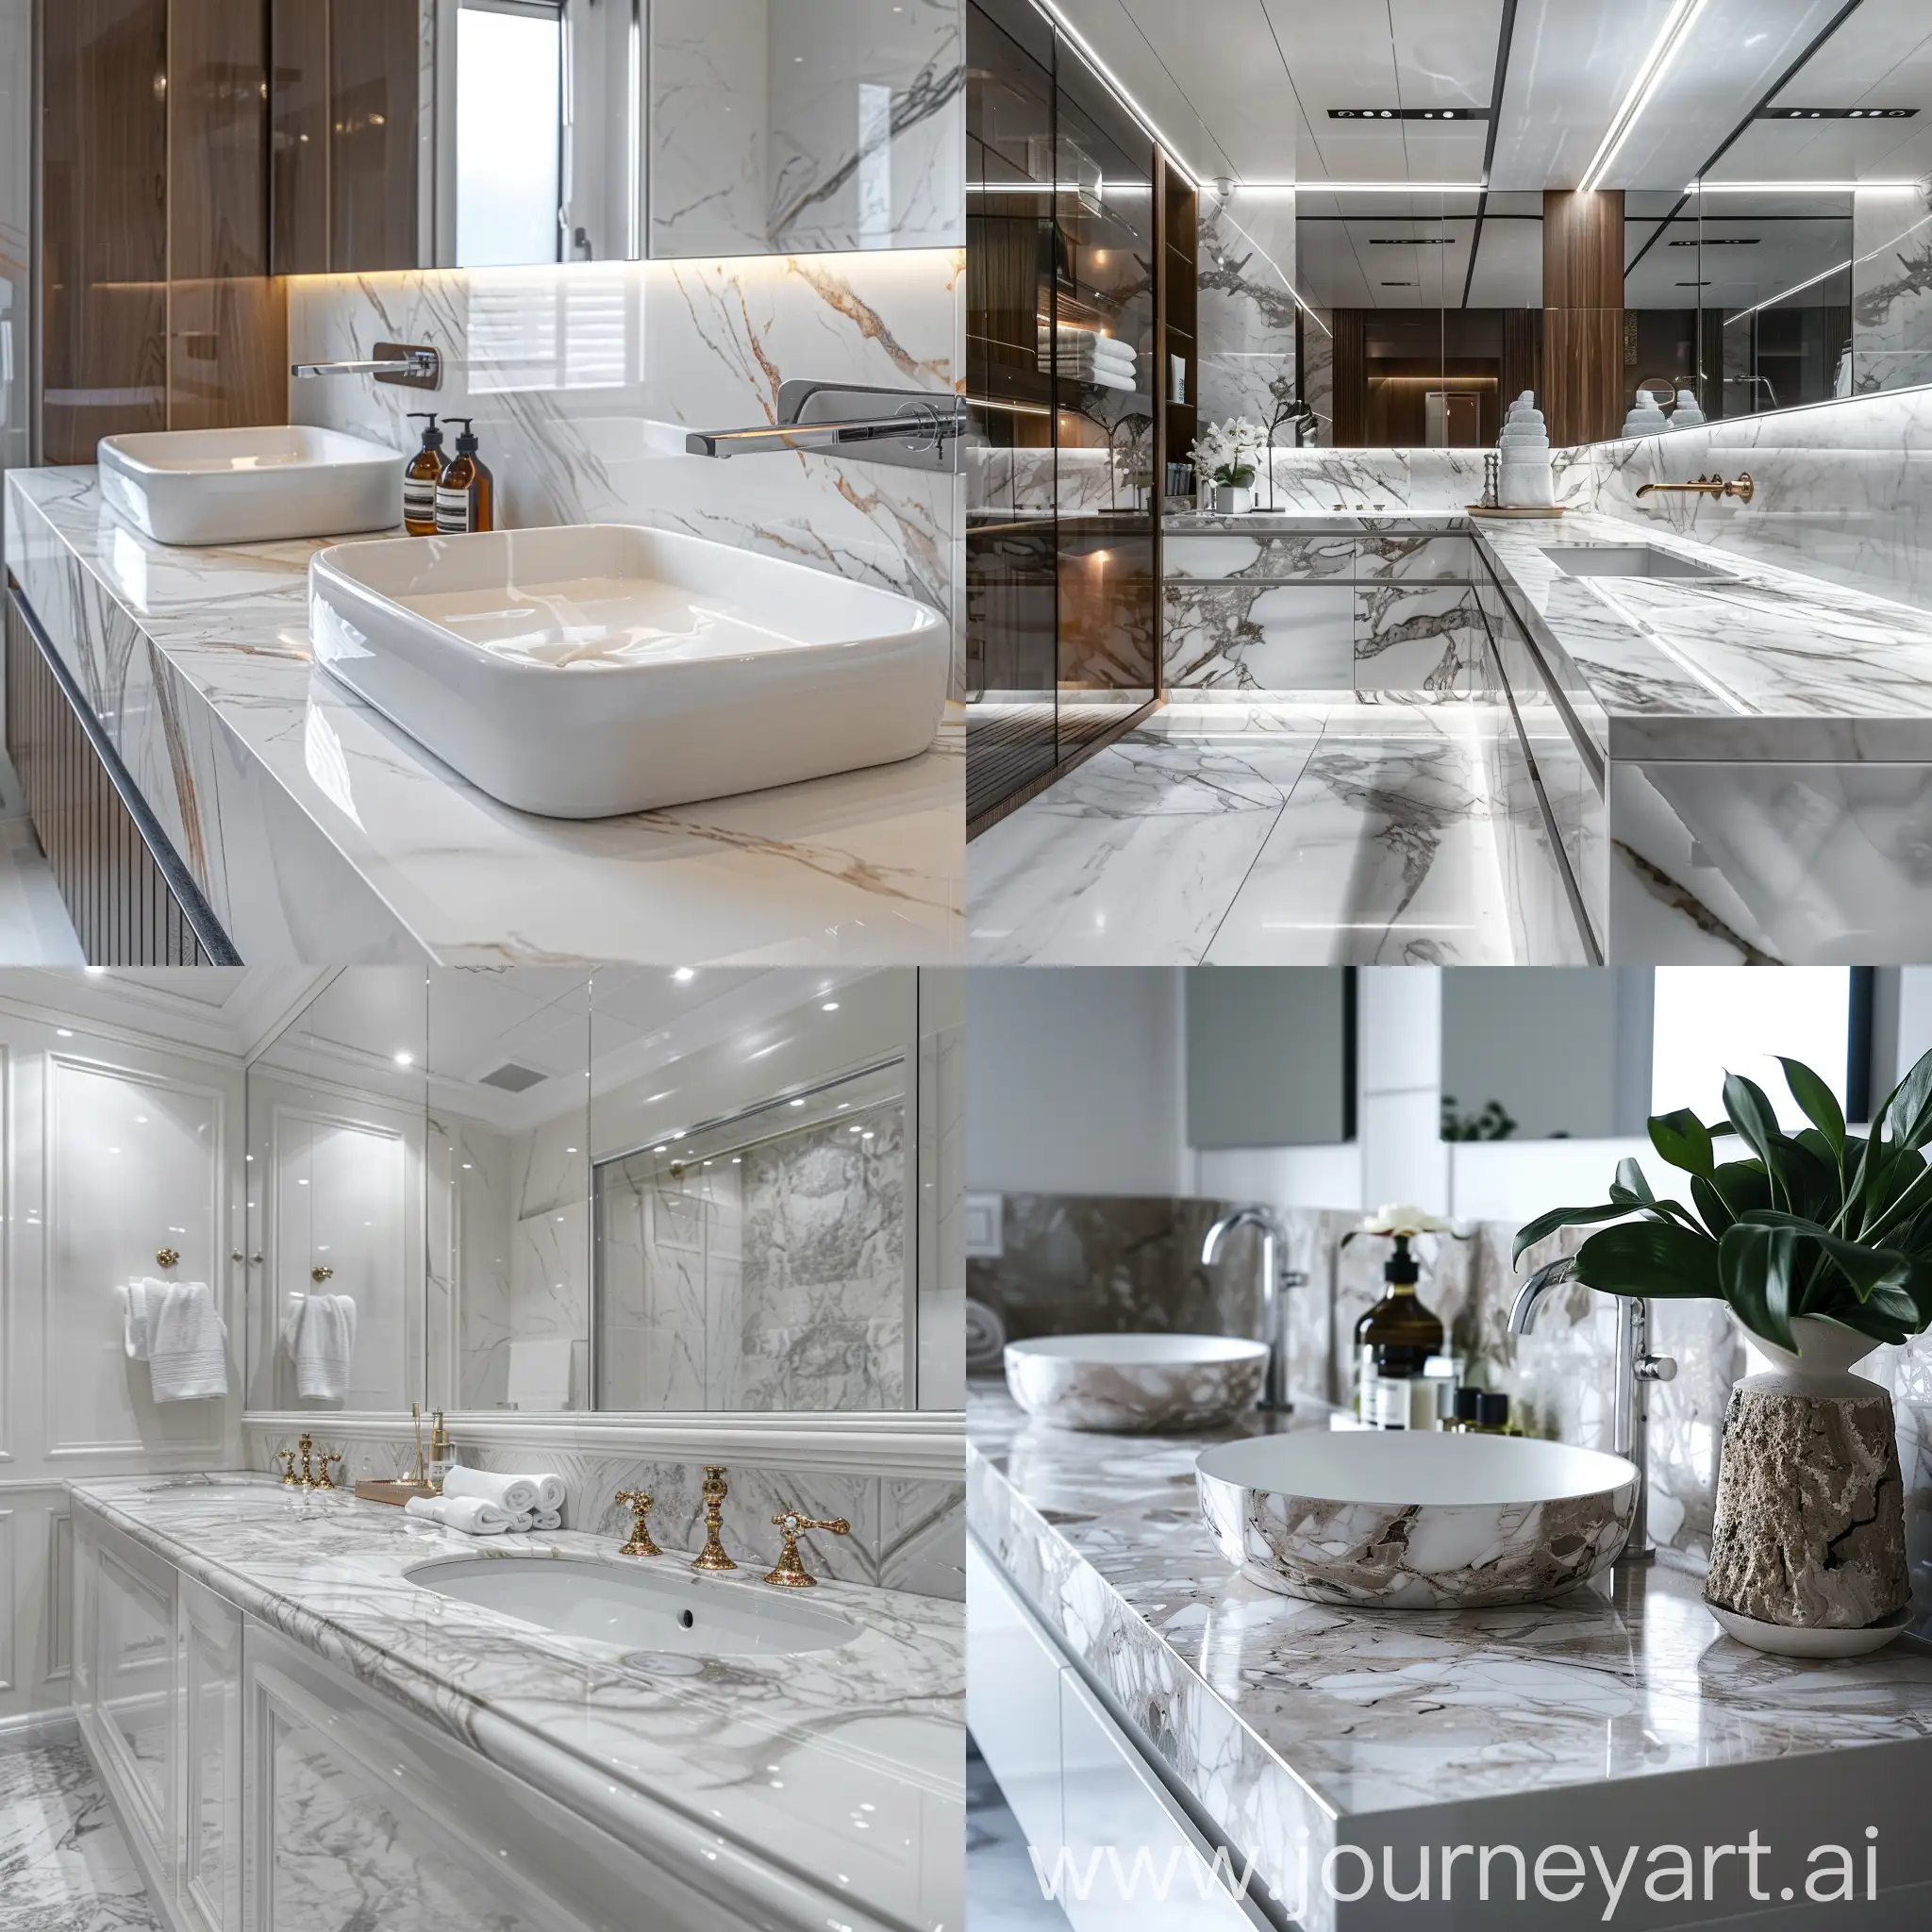 Luxury-Bathroom-Design-with-Cast-Marble-Countertops-in-Ultra-HD-Bright-Atmosphere